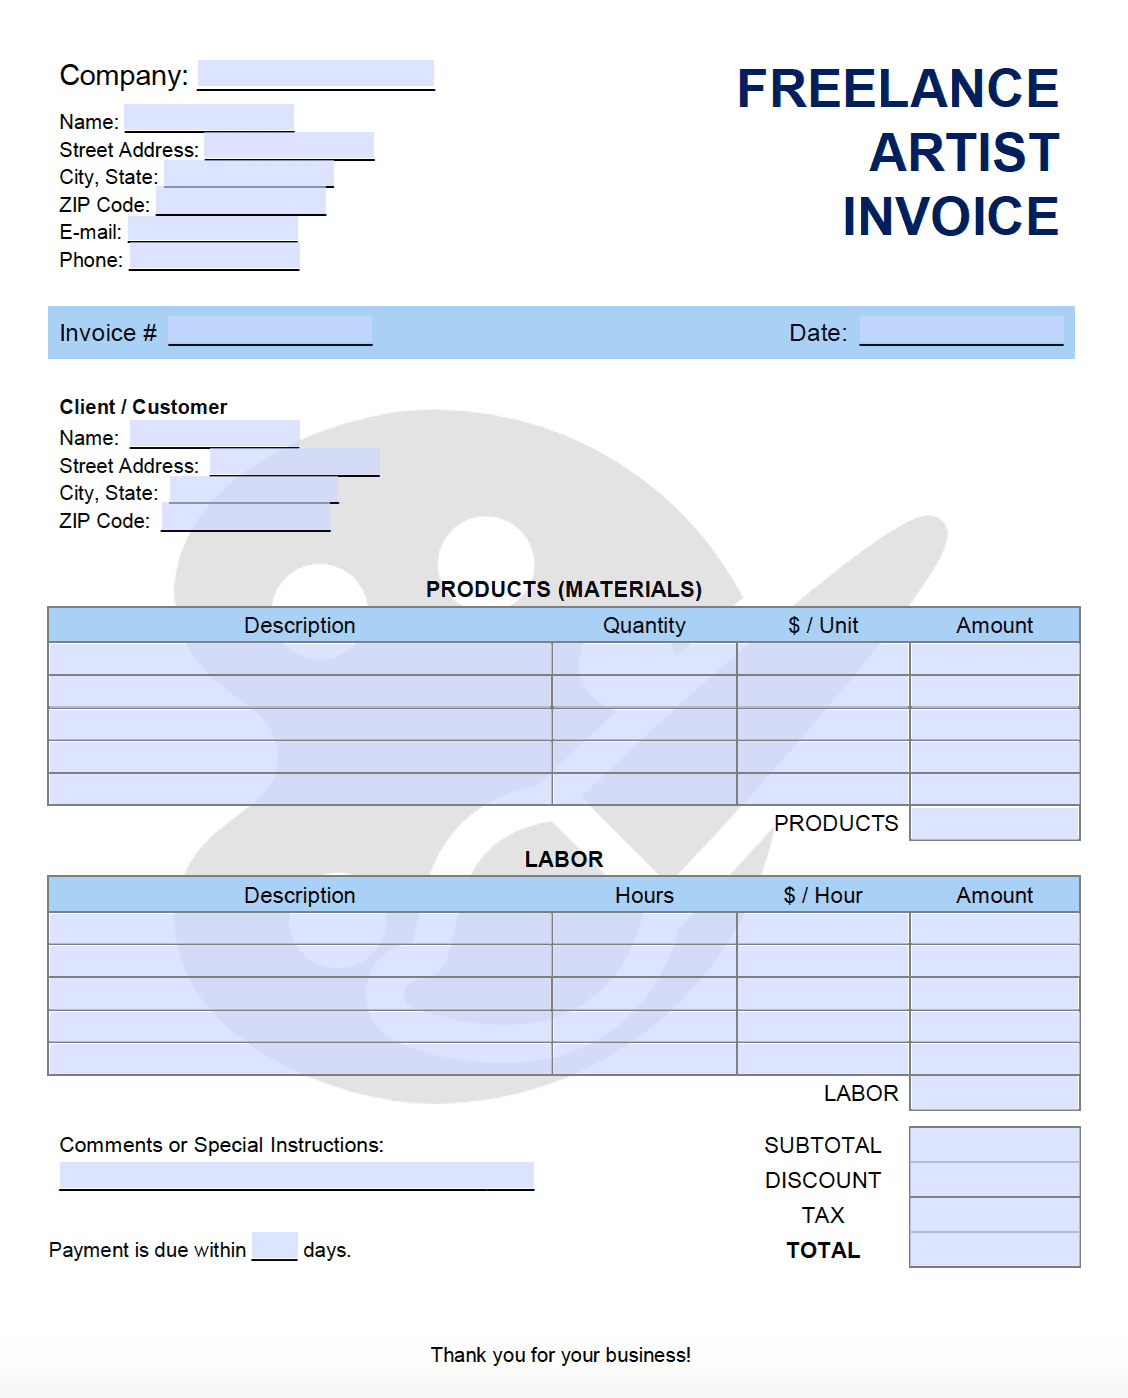 Artist Invoice Template PDF WORD EXCEL